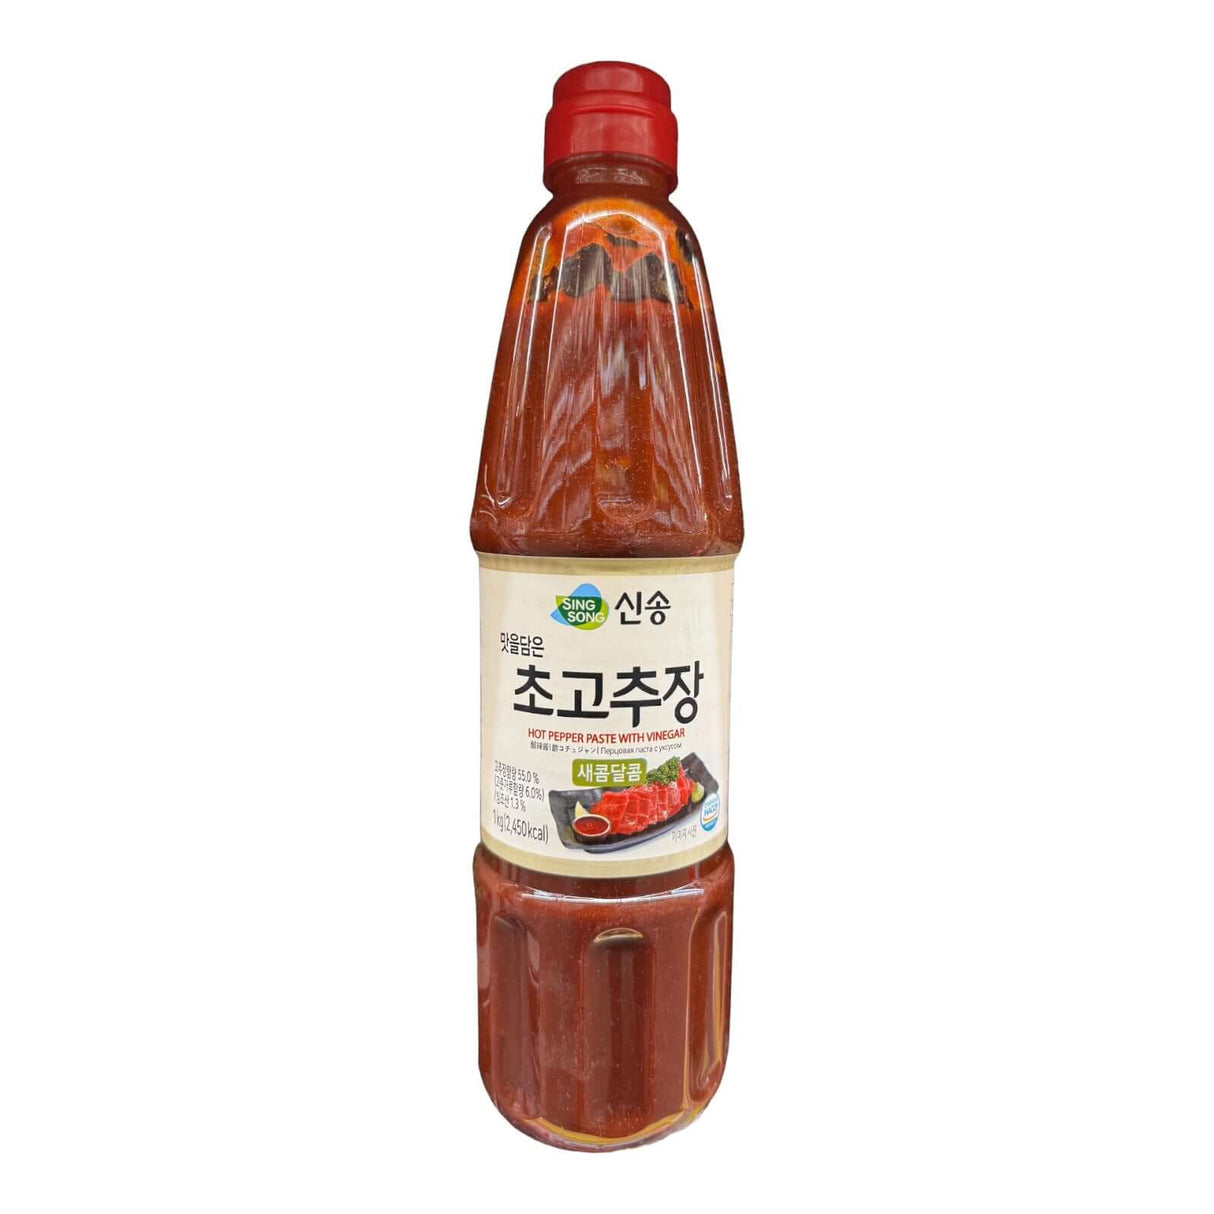 Sing Song Hot Pepper Paste with Vinegar